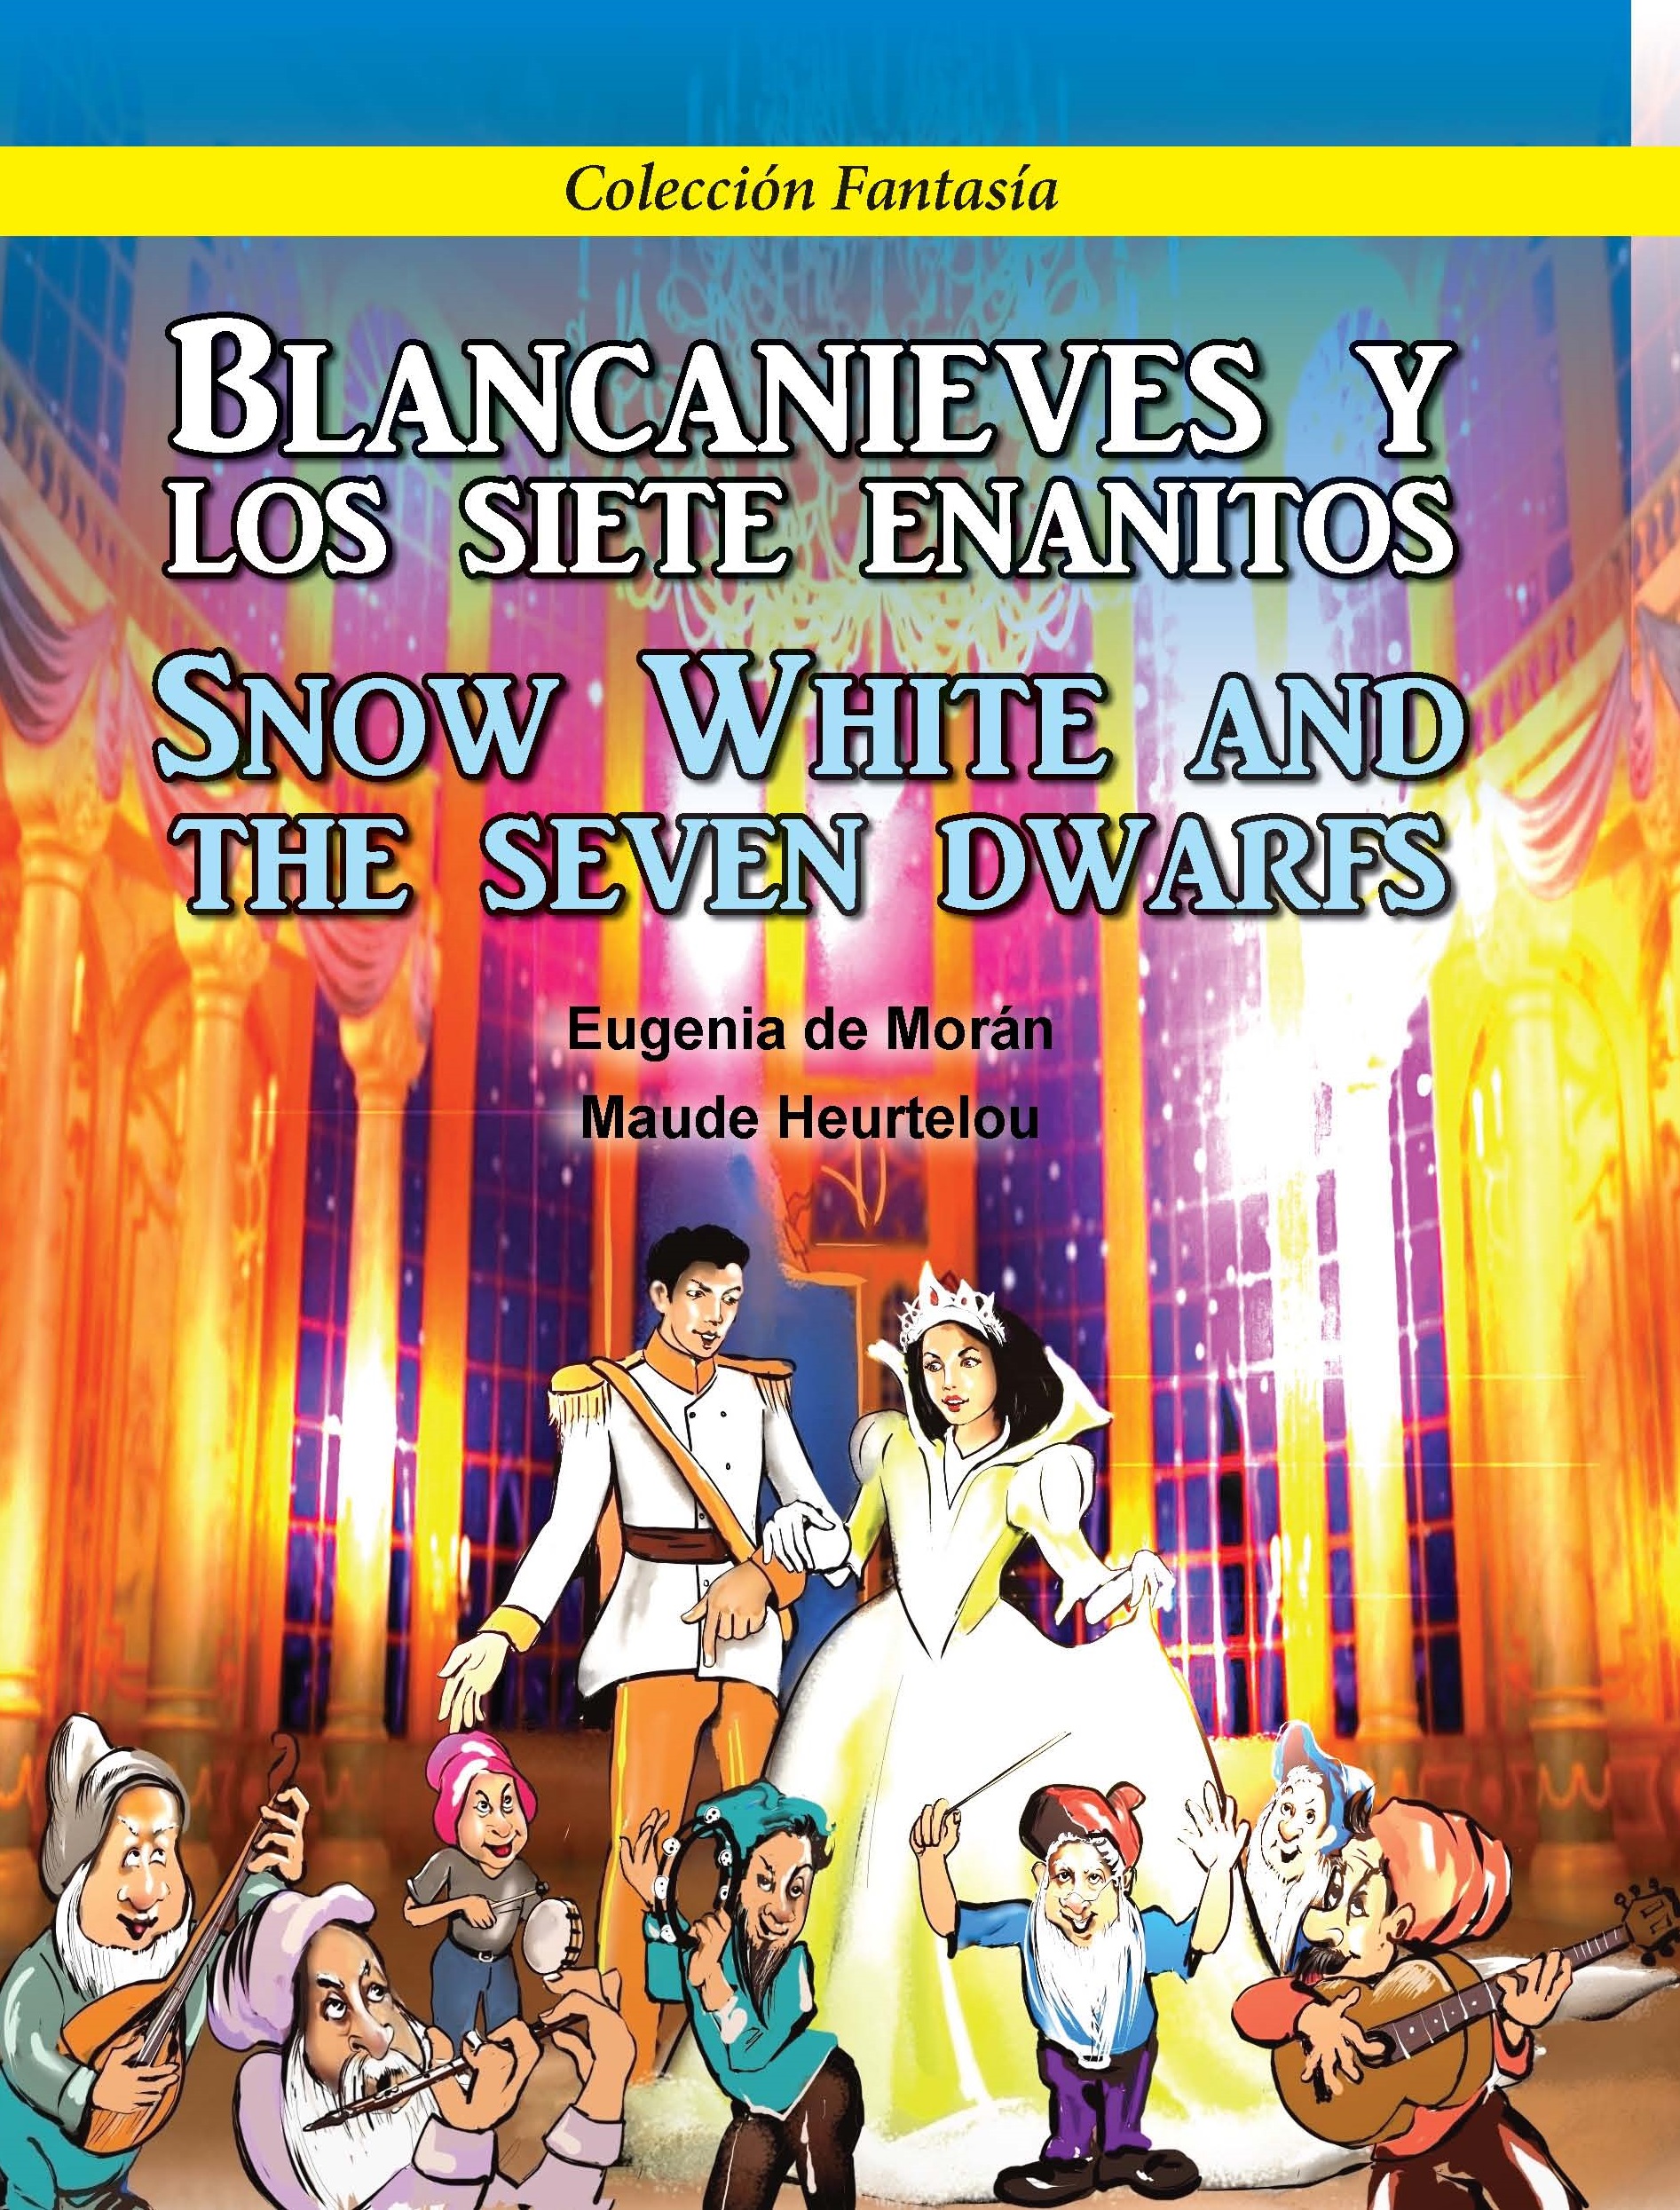 Blancanieves y los siete enanitos/
Snow White and the seven dwarfs